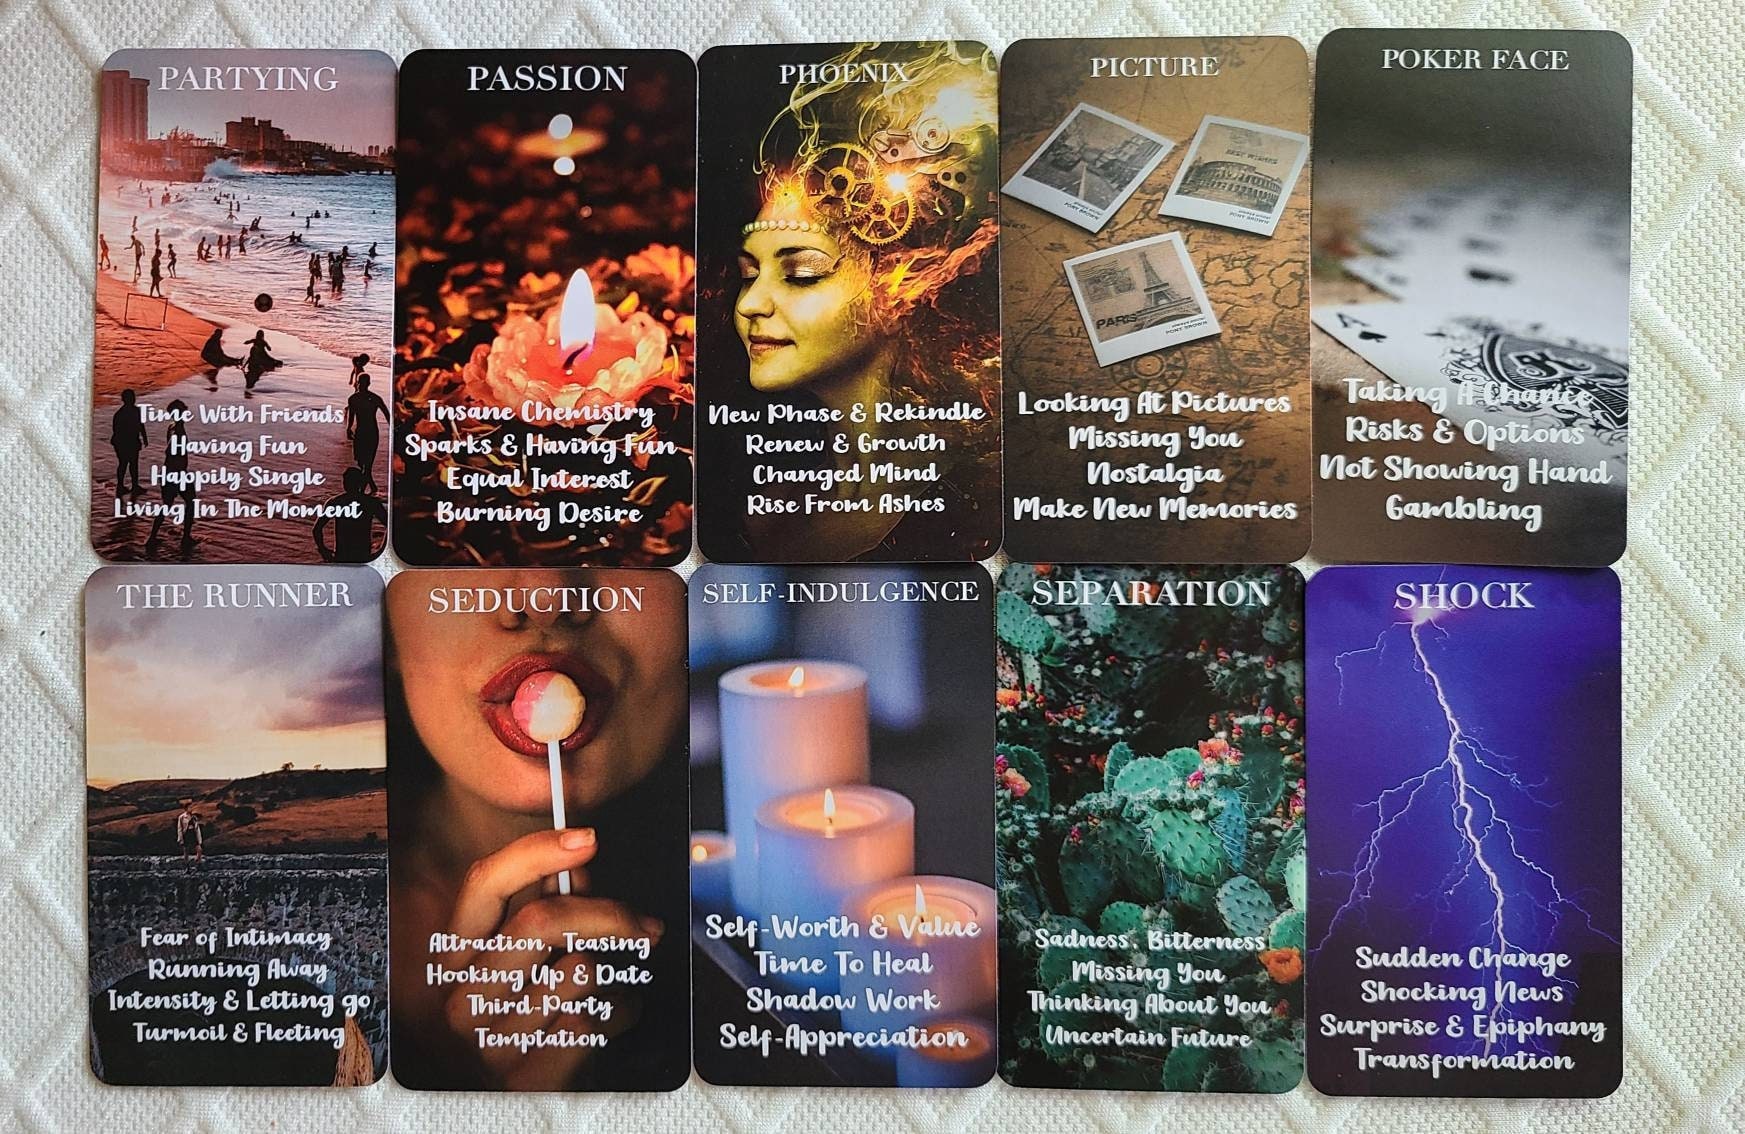 Oracle Cards : What are they and how to use them? — Whimsical